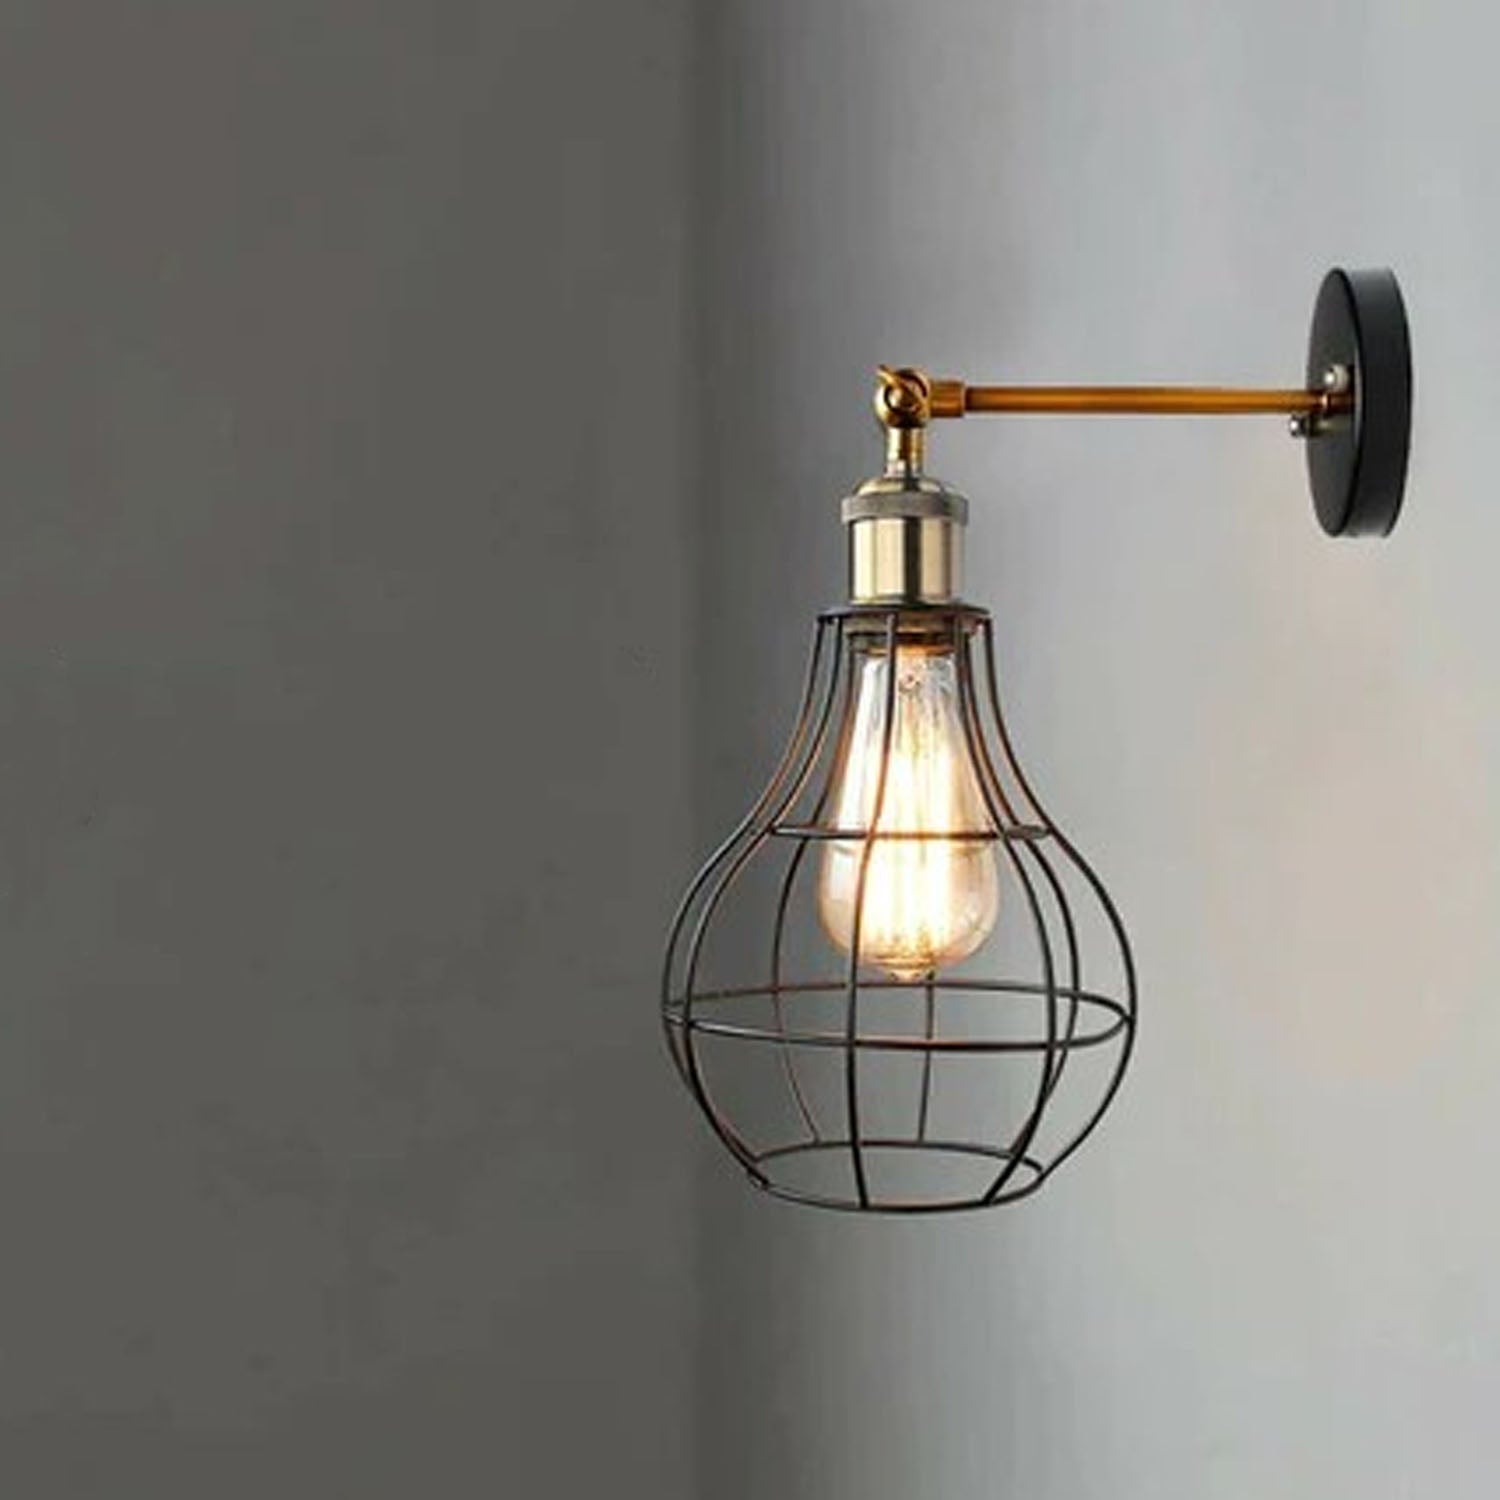 Vintage Industrial Wall Light with FREE Bulb Antique Retro Cage Adjustable Wall Sconce Lamp~2270